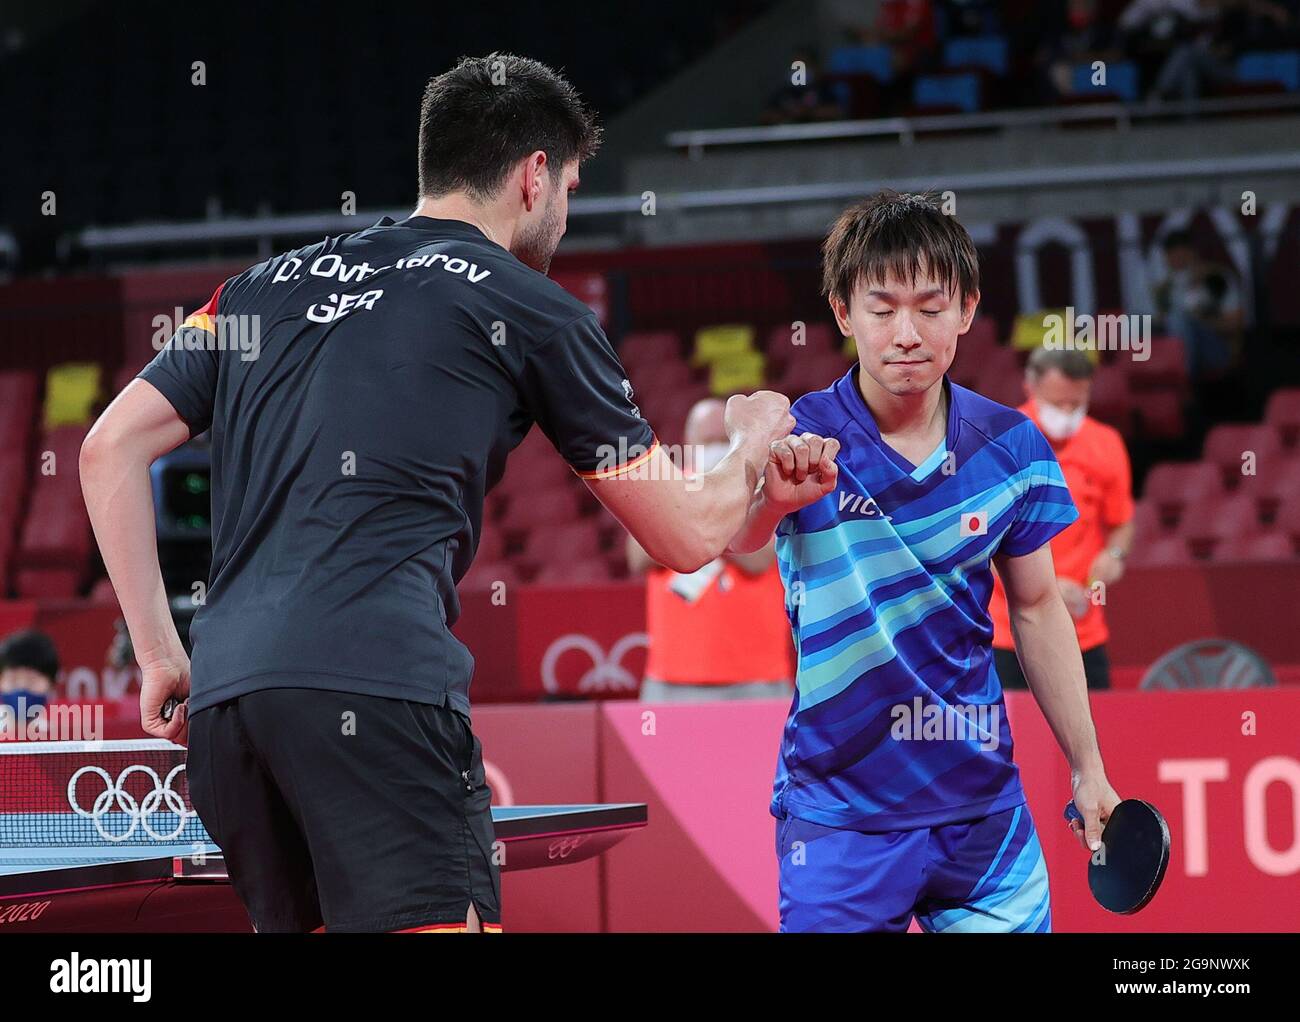 Tokyo, Japan. 27th July, 2021. Koki Niwa (R) of Japan greets his opponent, Dimitrij Ovtcharov of Germany after losing the table tennis men's singles round of 16 match at the Tokyo 2020 Olympic Games in Tokyo, Japan, July 27, 2021. Credit: Wang Dongzhen/Xinhua/Alamy Live News Stock Photo